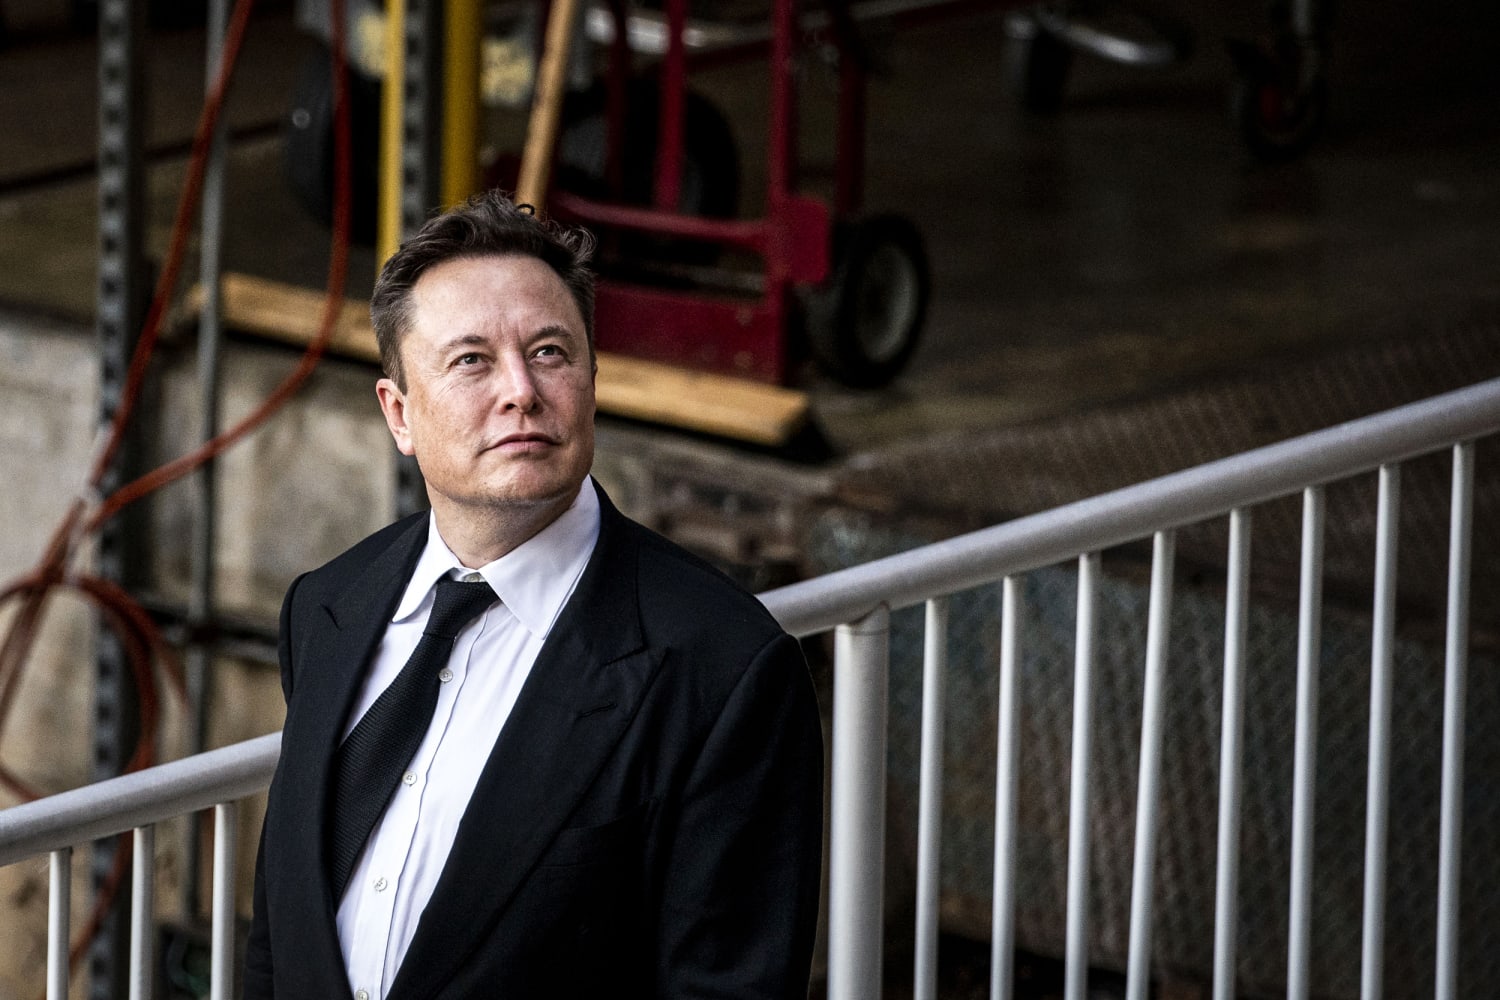 Elon Musk, CEO of Tesla and SpaceX, is Time’s Person of the Year